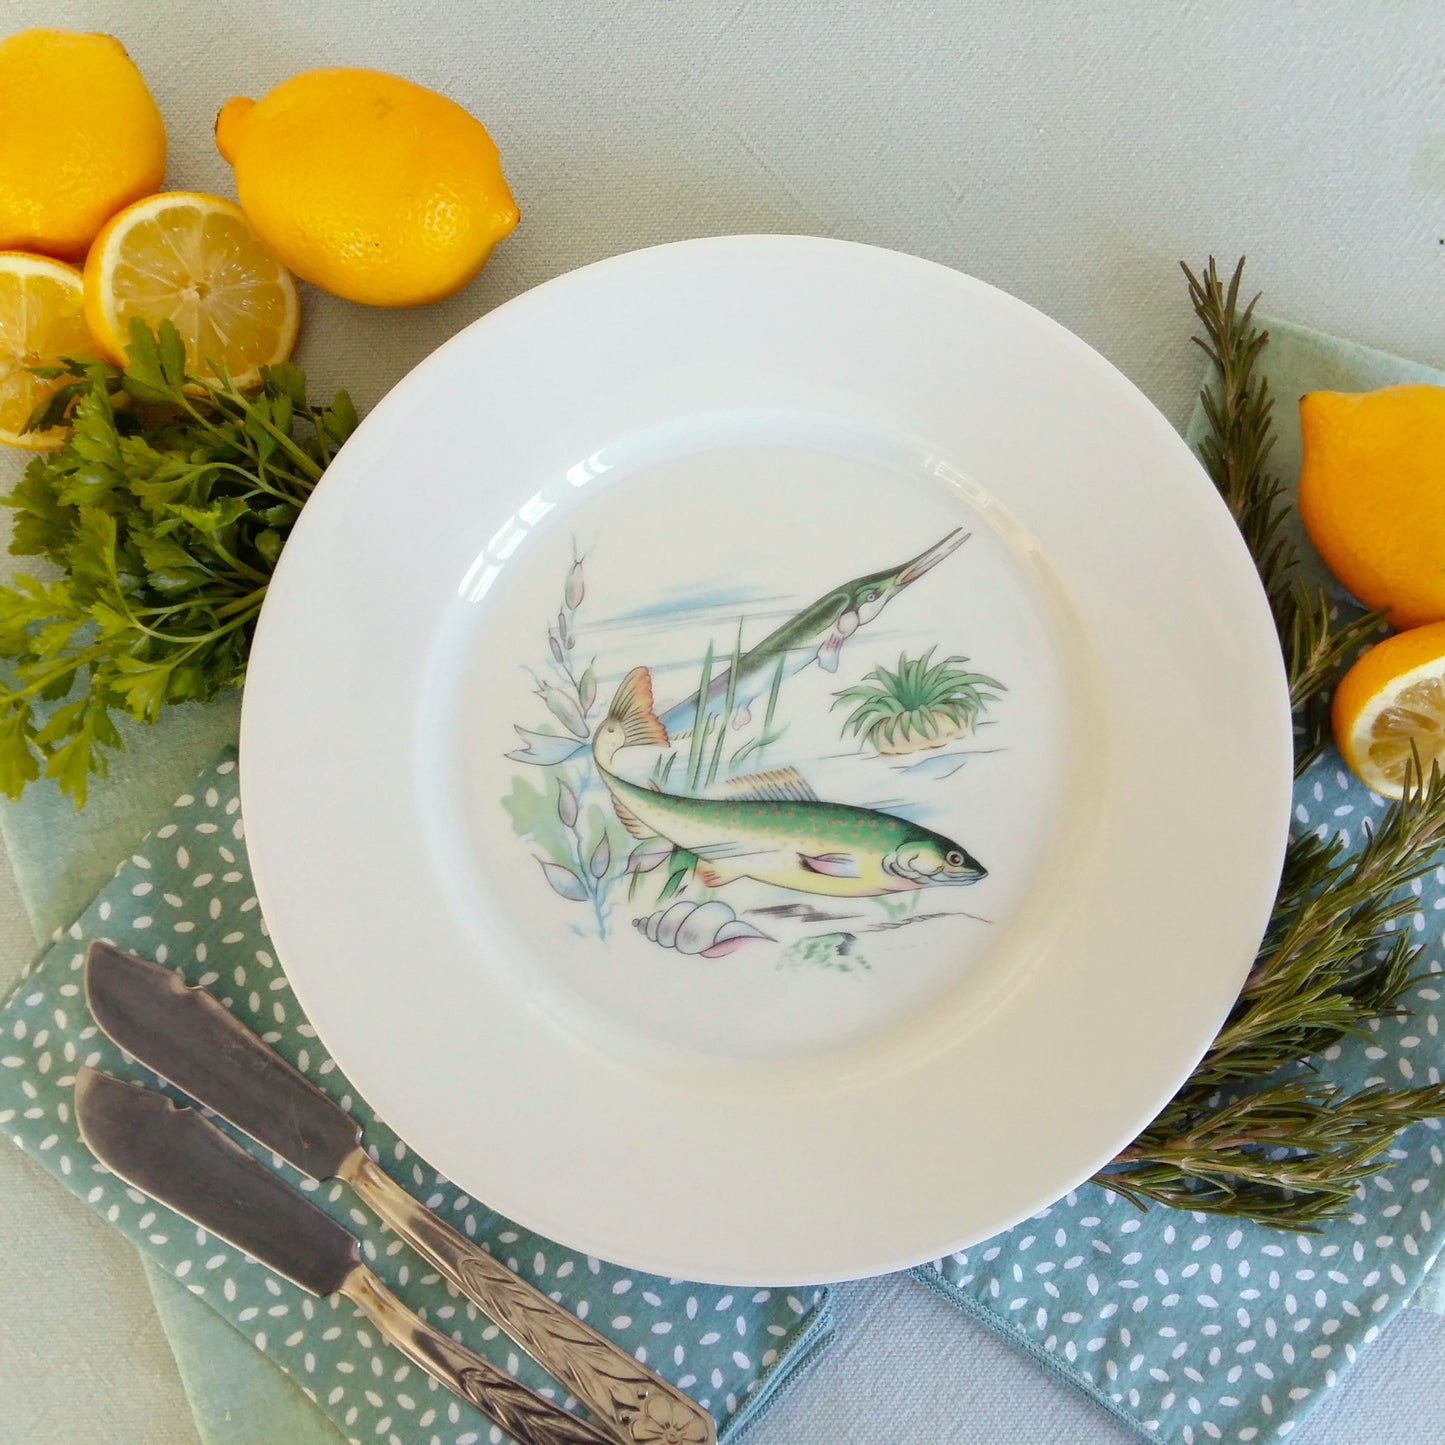 Set of SIX Limoges Porcelain Fish Plates from Tiggy & Pip - Just €168! Shop now at Tiggy and Pip